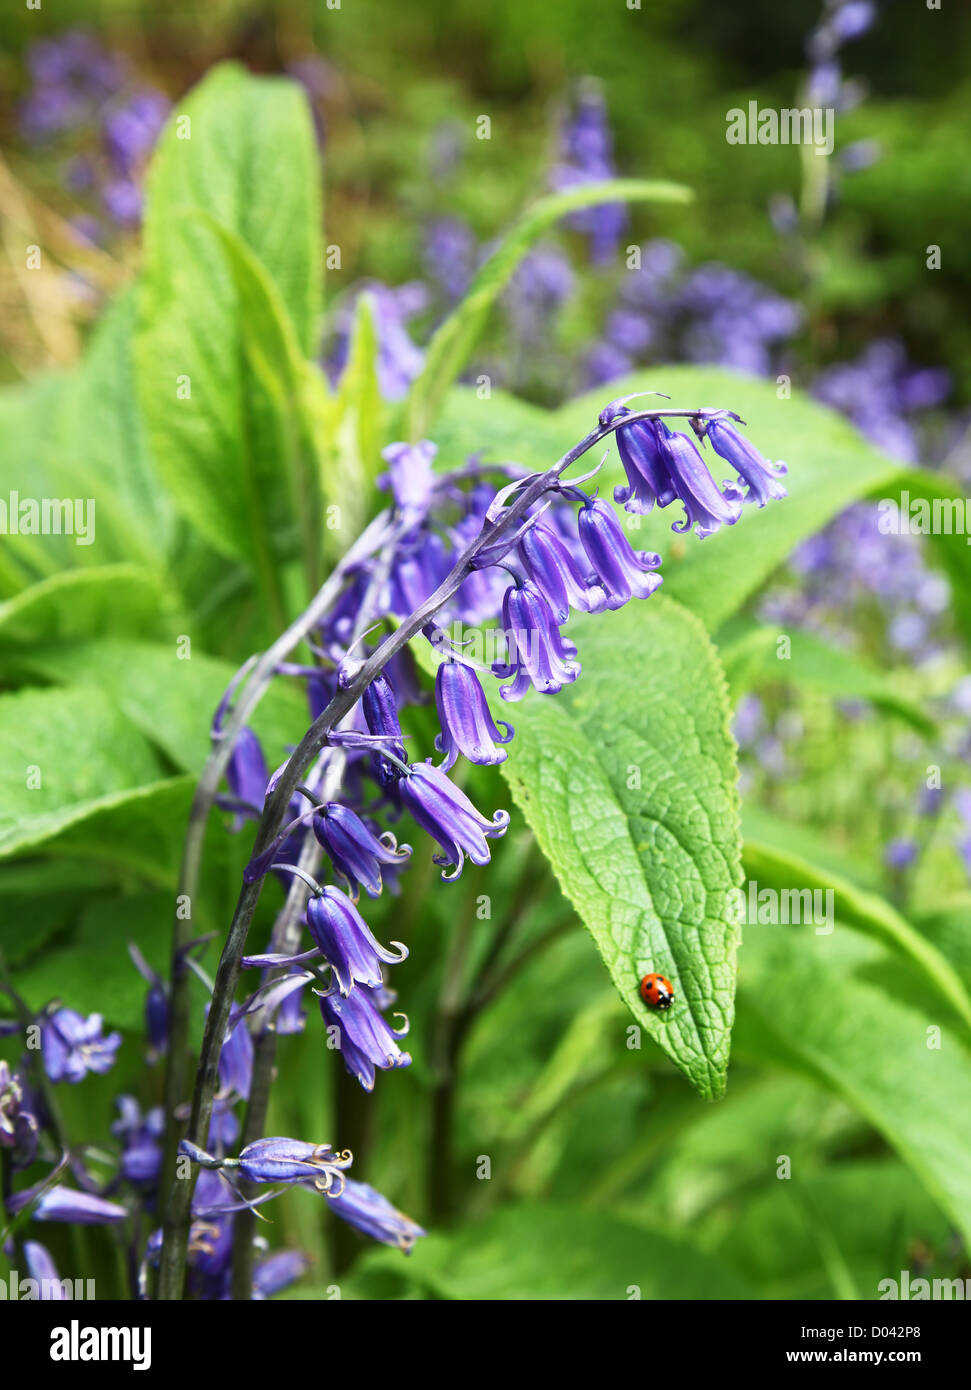 Common Bluebells (Hyacinthoides non-scripta) with a ladybird on a leaf Stock Photo